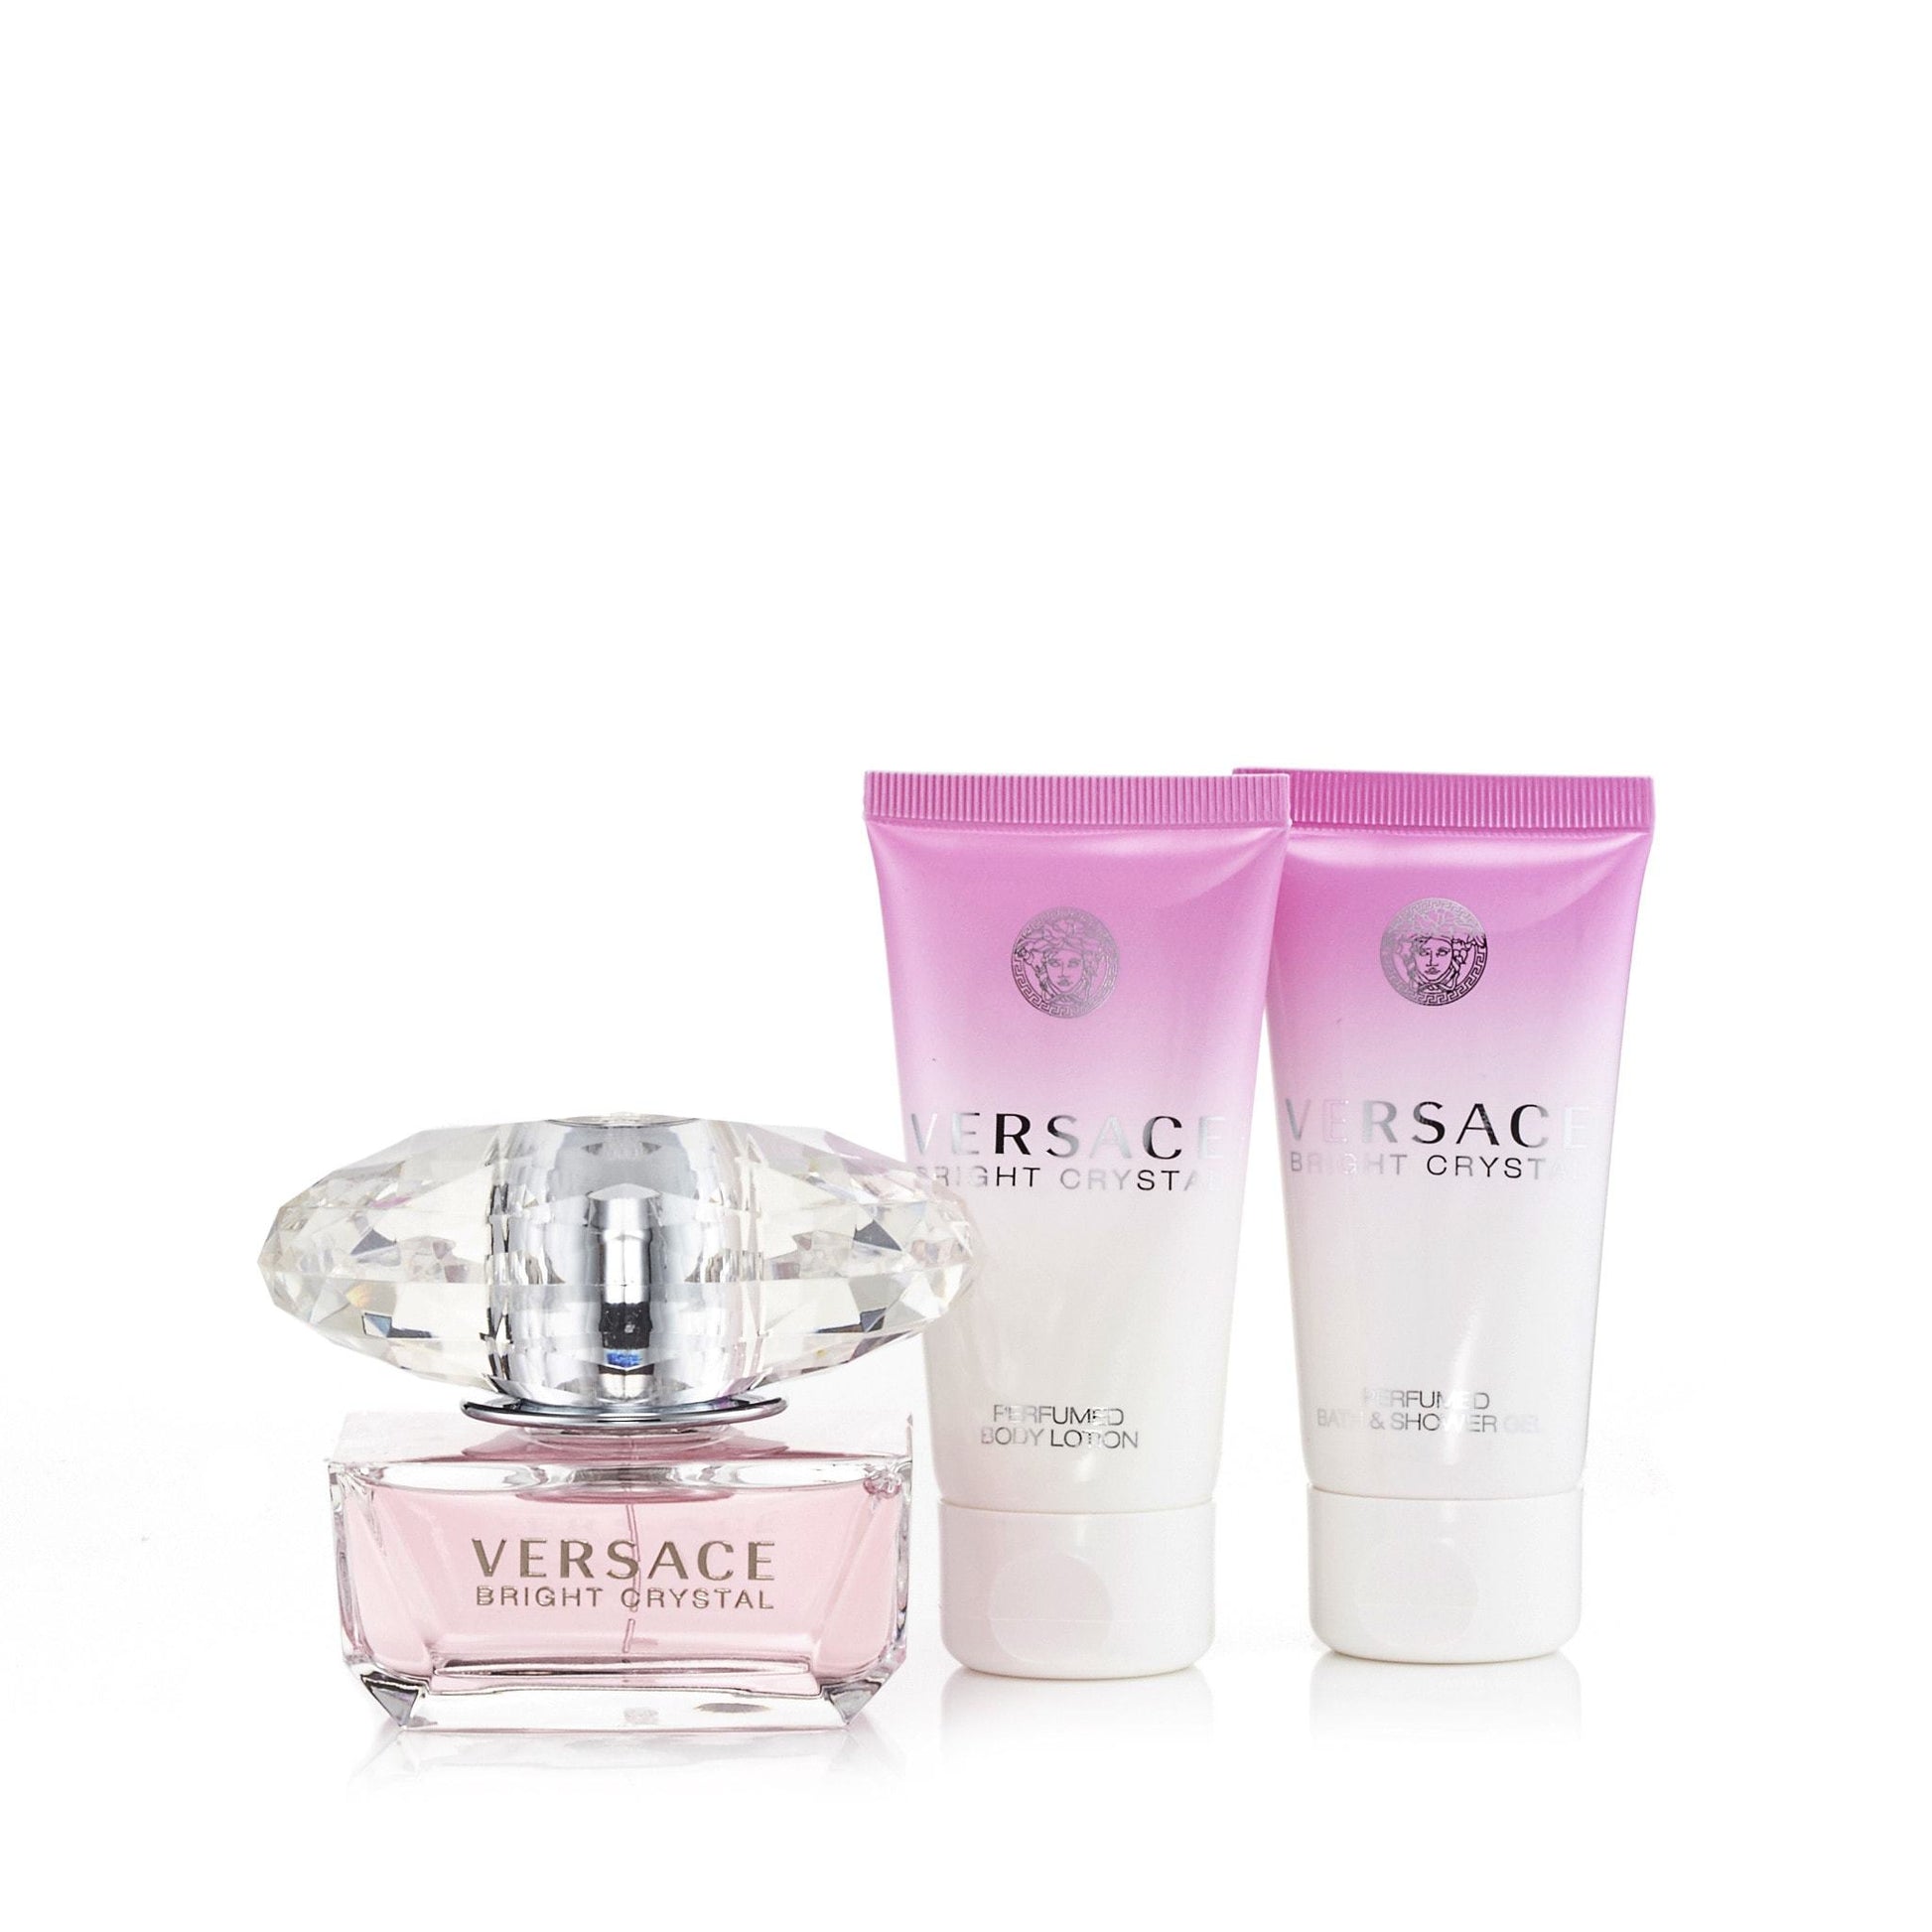 Bright Crystal Gift Set Eau de Toilette Body Lotion and Shower Gel for Women by Versace, Product image 1